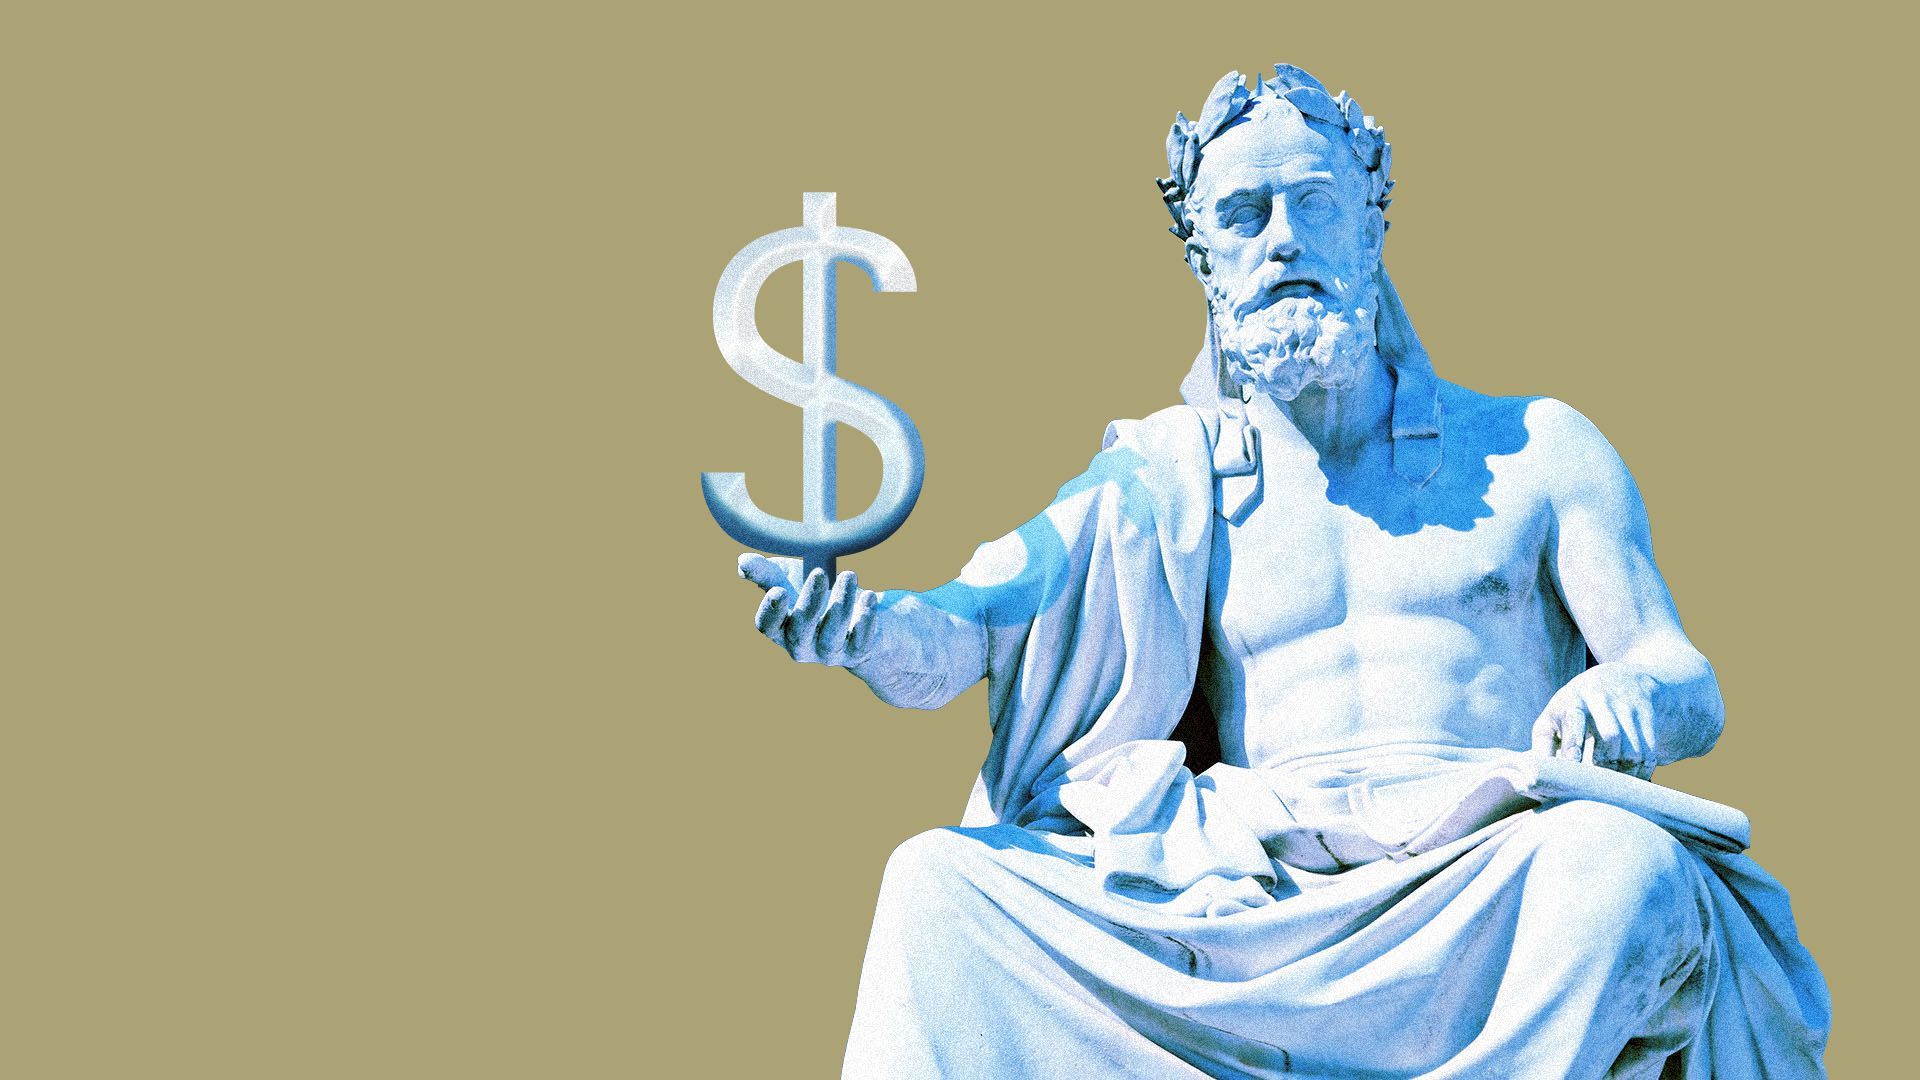 A Greek statue holding a dollar sign.